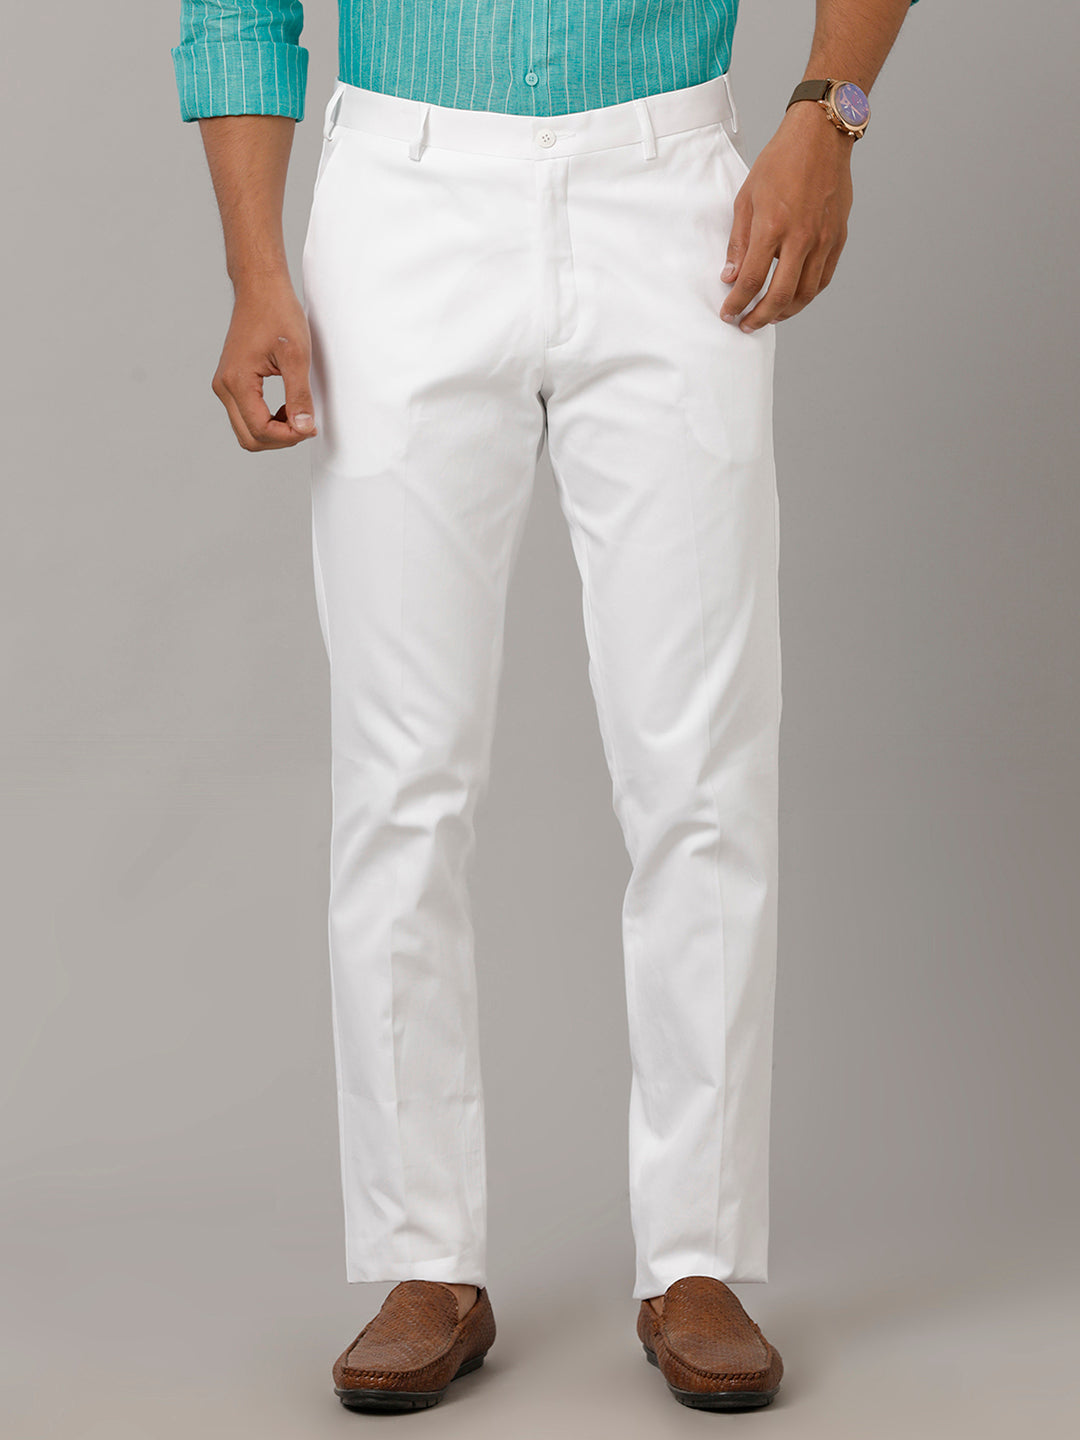 Mens Regular Fit Cotton White Pants Easy Care